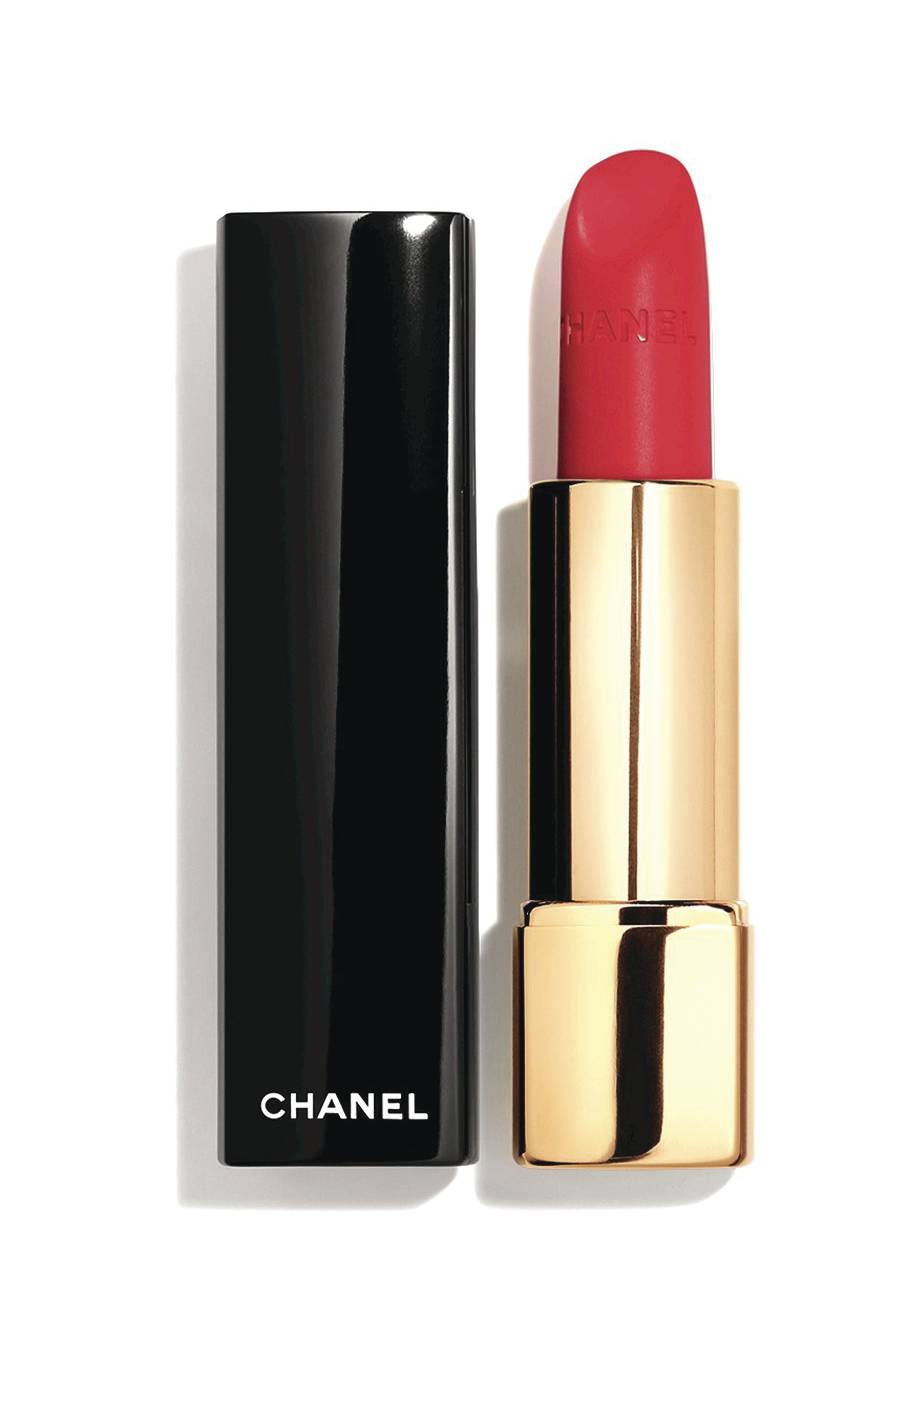 Chanel red lipstick from Orchard Mile